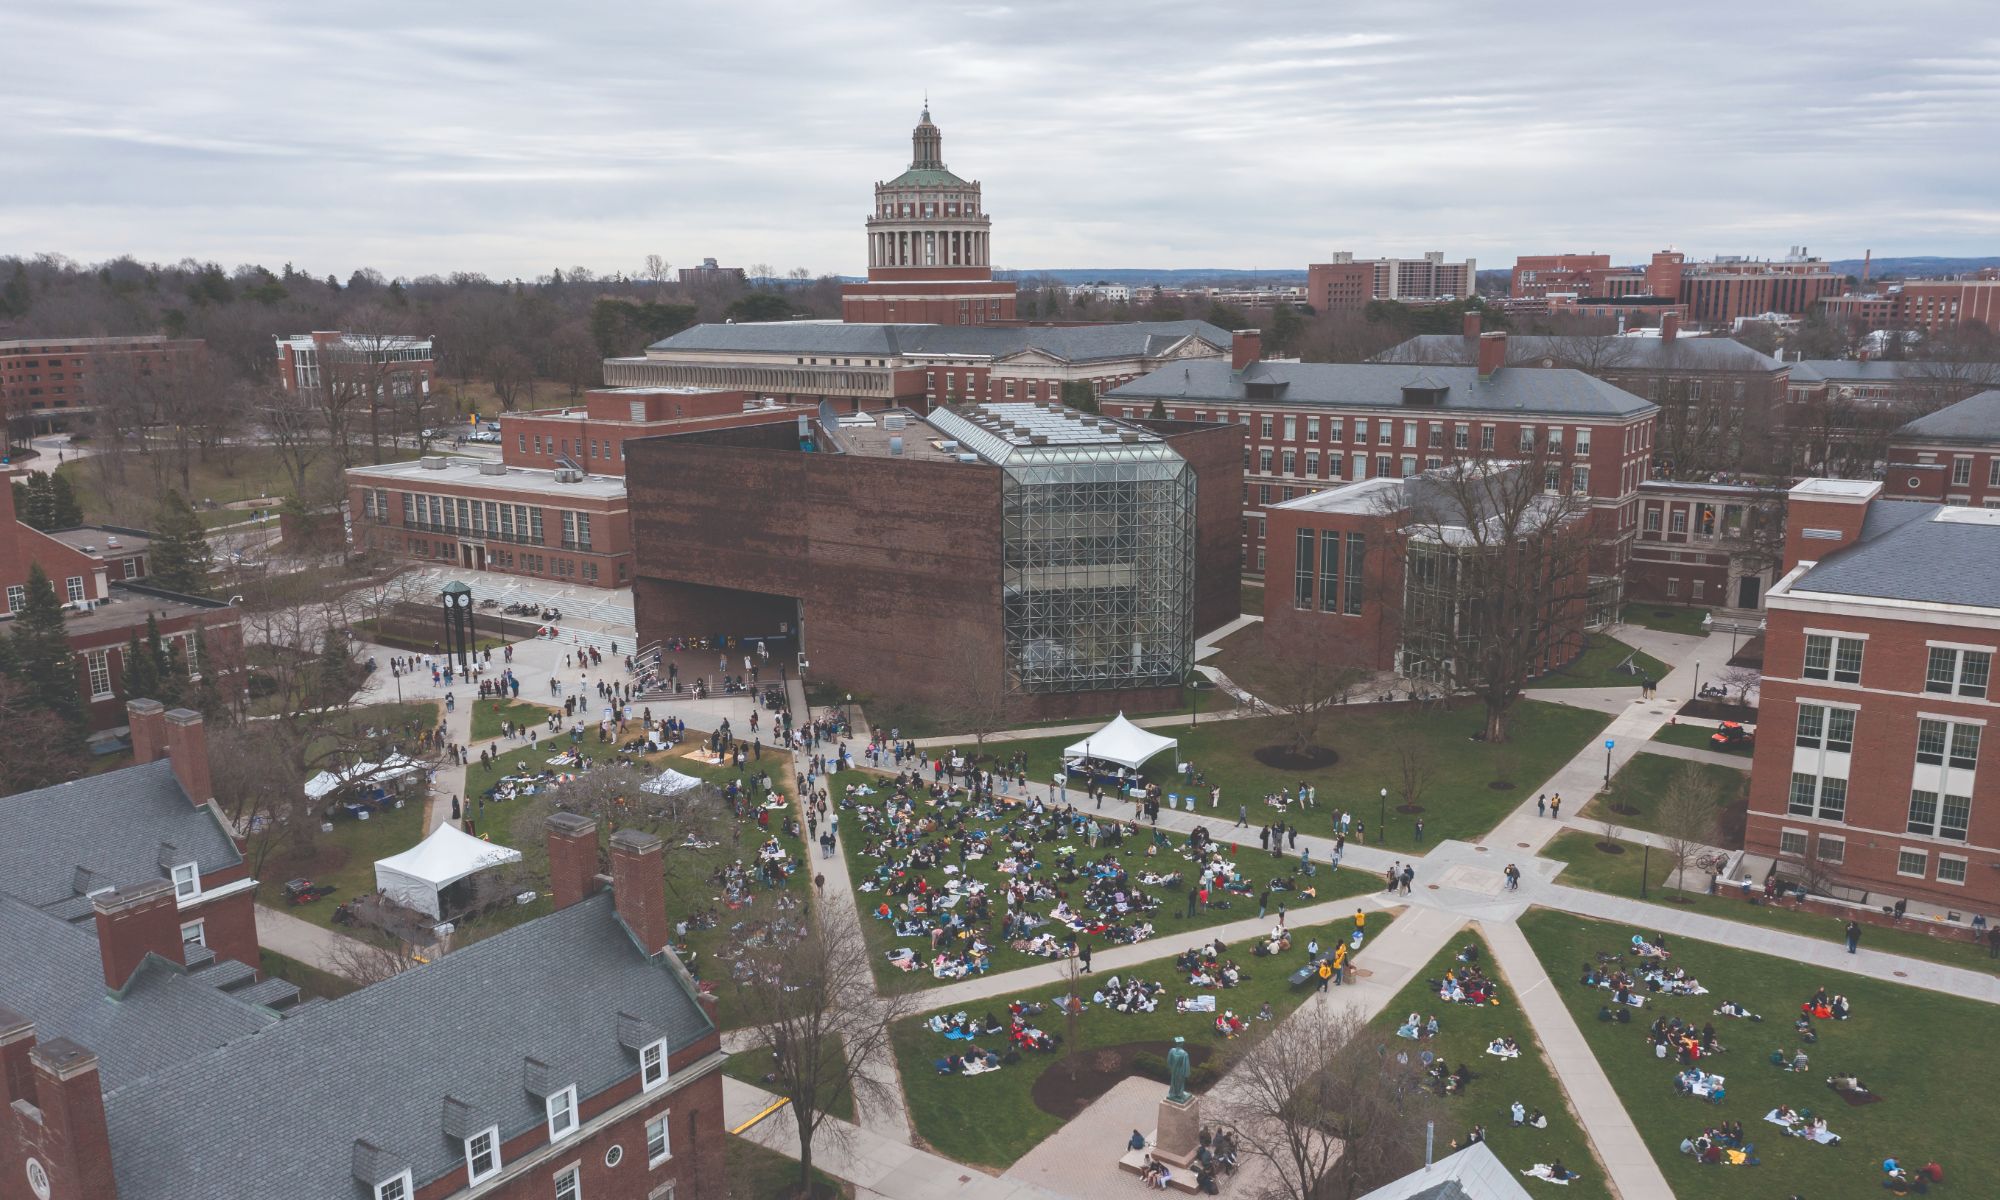 Aerial view of a college campus with students gathered on lawns. The campus features several brick buildings, including one with a prominent dome. Tents and groups of people are visible, suggesting an event. The sky is overcast.